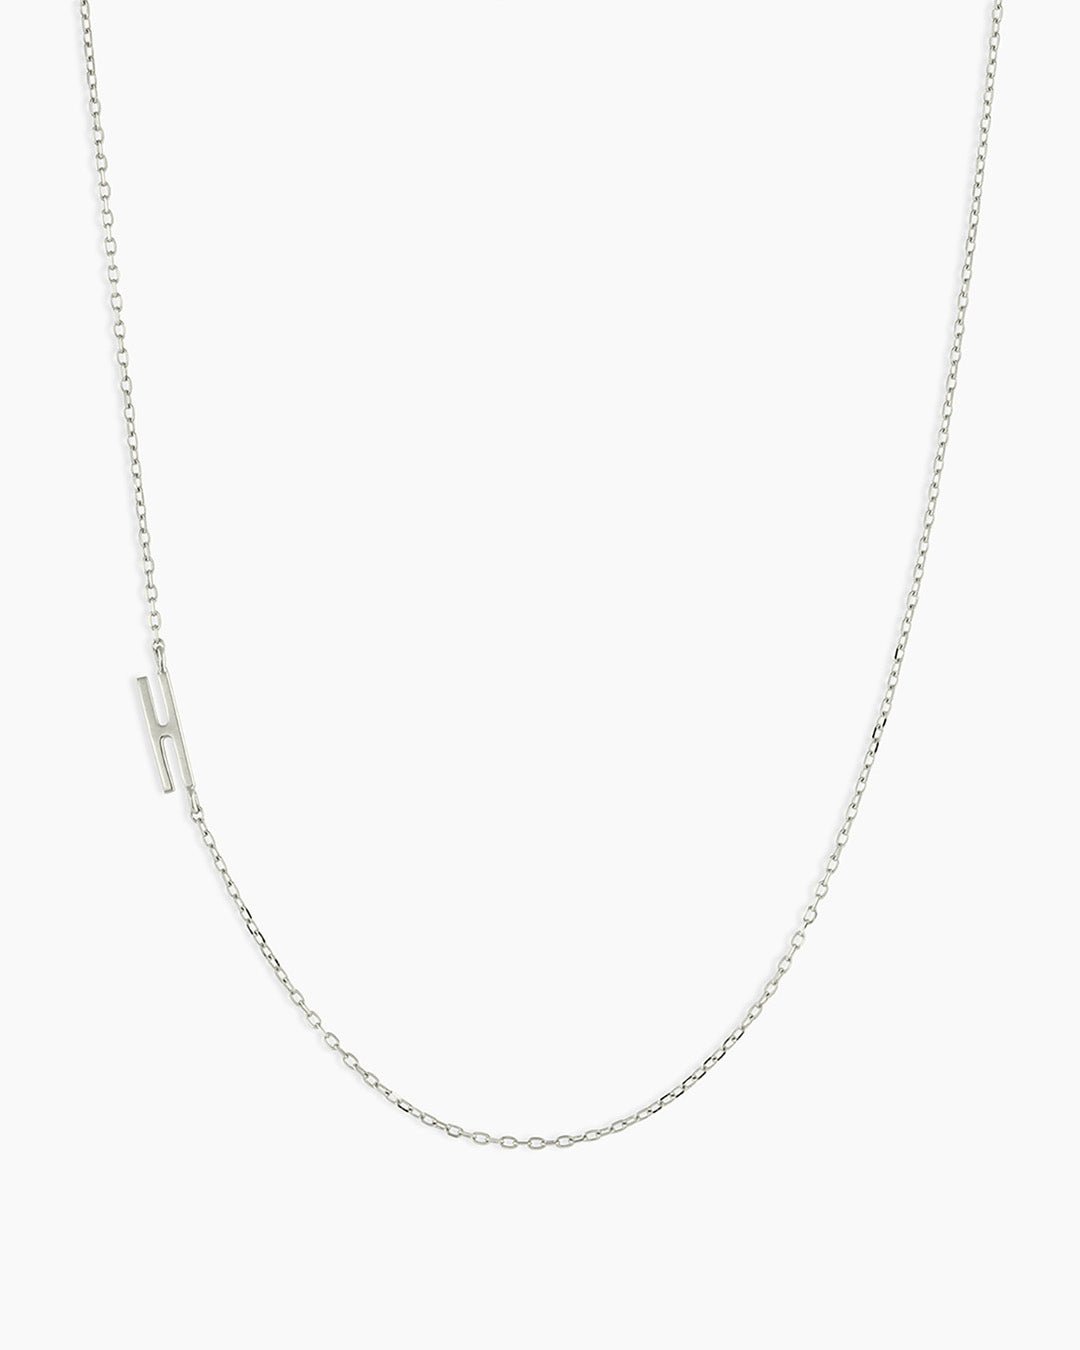 Woman wearing Alphabet Necklace || option::14k Solid White Gold, H